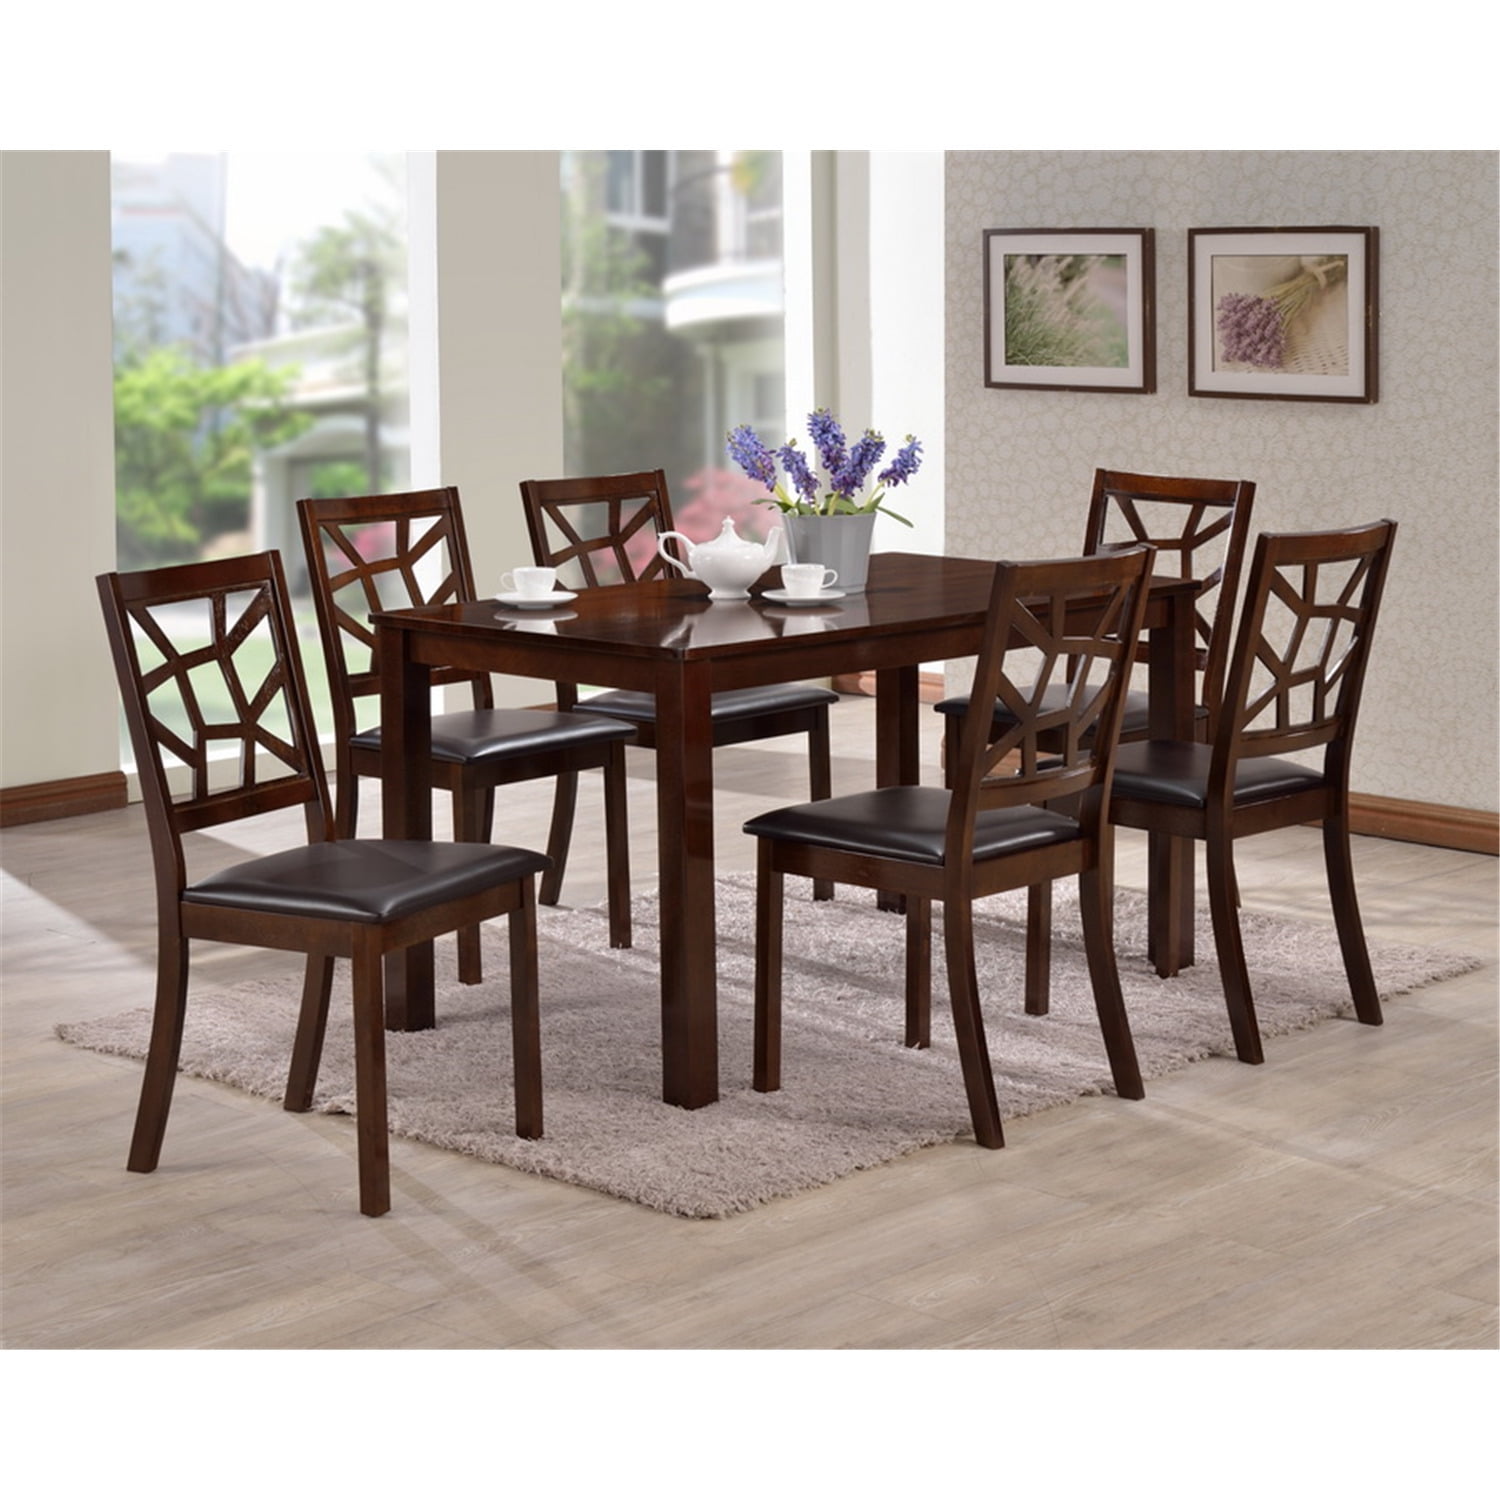 Ashley Coviar 6 Piece Dining Table Set, Coviar Dining Room Table And Chairs With Bench Set Of 6 Brown